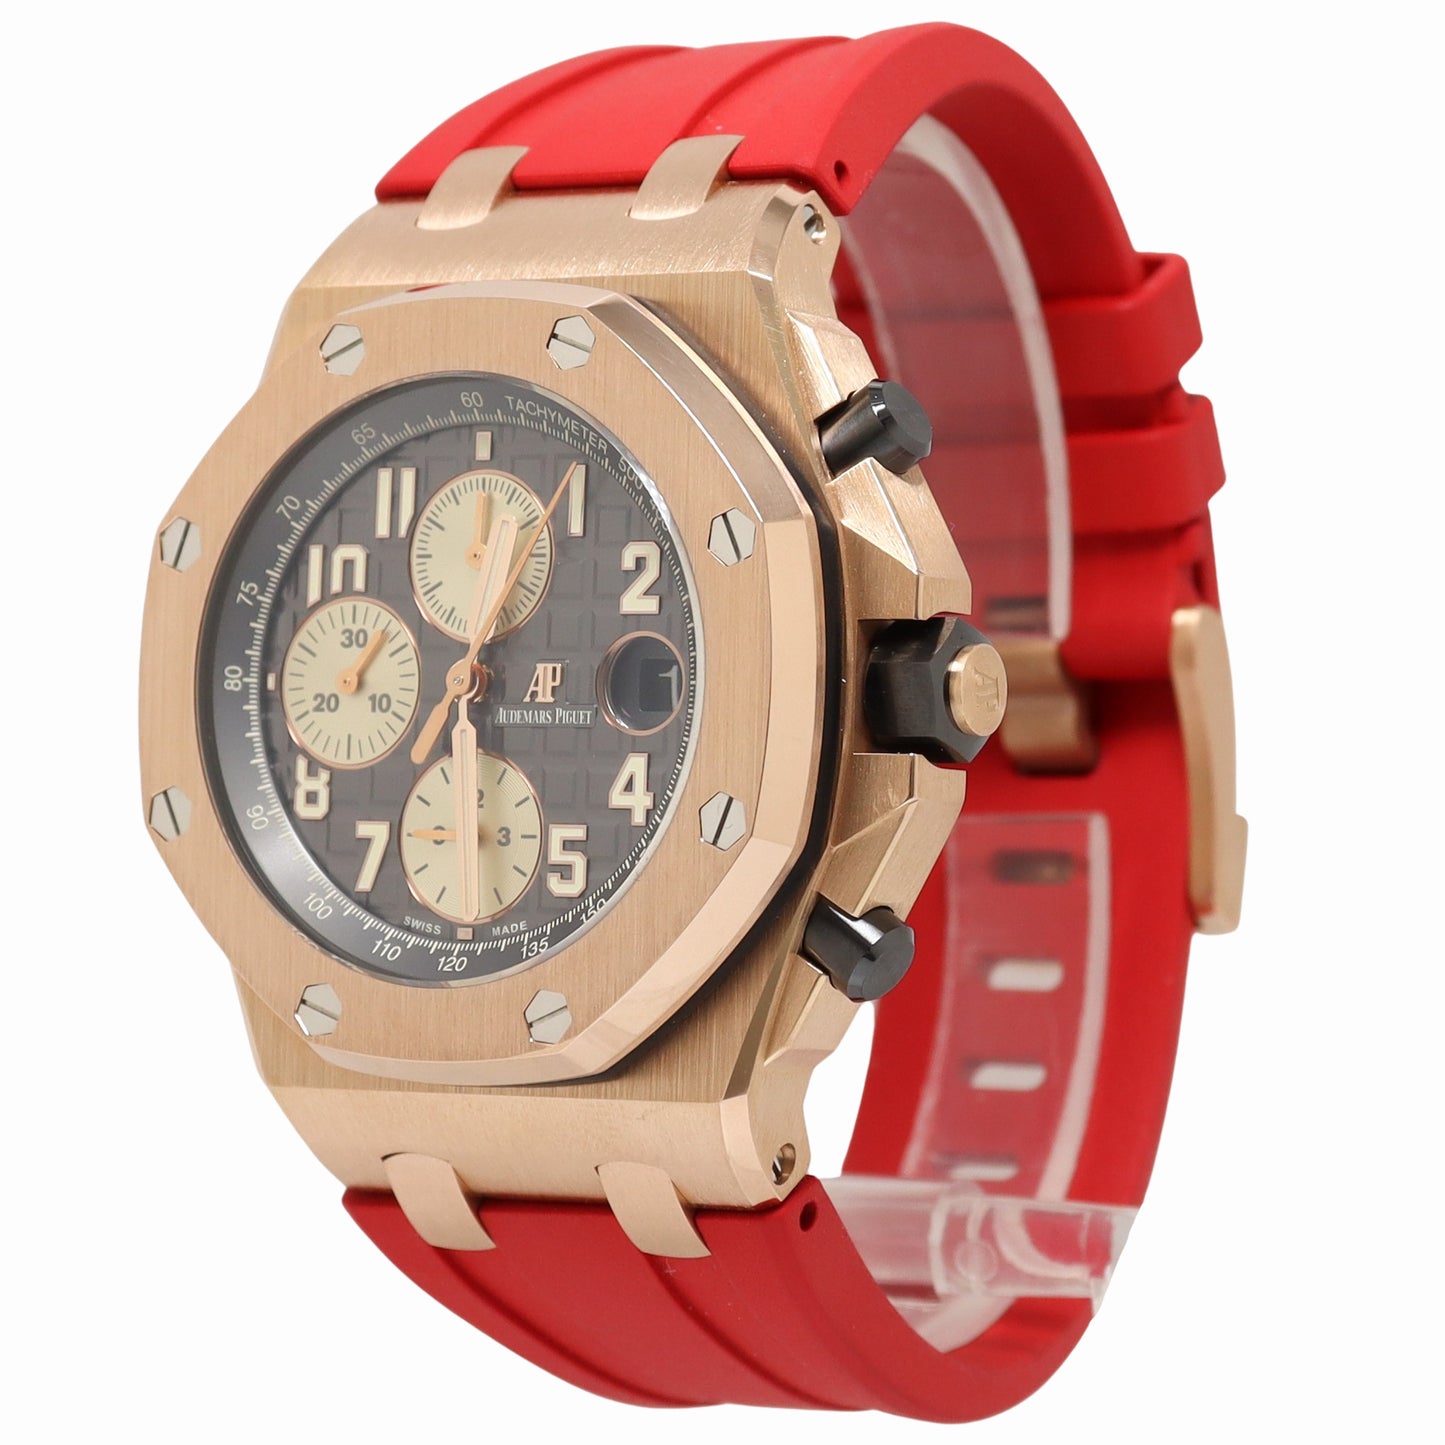 Audemars Piguet Royal Oak Offshore 42mm Rose Gold Gray Ruthenium Mega Tapisserie Dial Watch Reference# 26470OR.OO.A125CR.01 - Happy Jewelers Fine Jewelry Lifetime Warranty